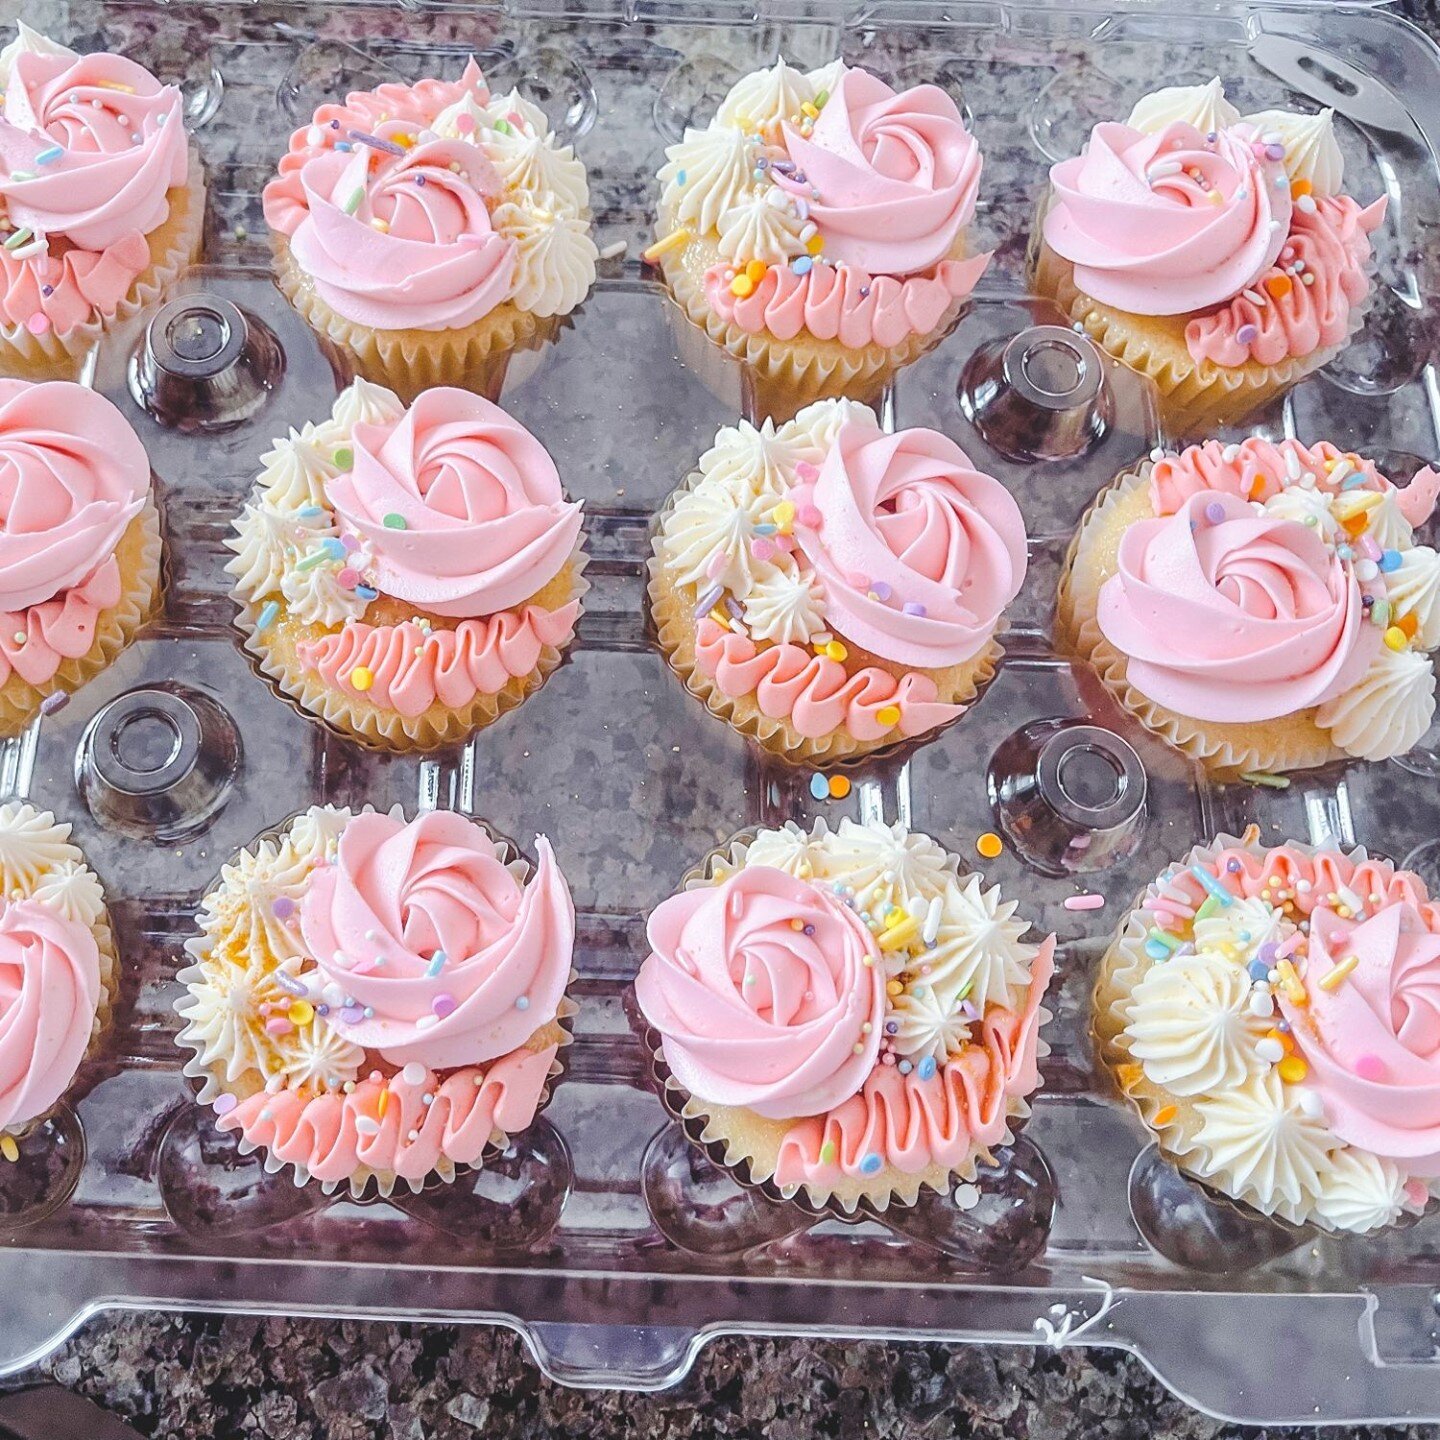 Love a pretty set of birthday cupcakes! Pretty in Pink 💖 ⠀
⠀
⠀
⠀
#confettibakeco #kwawesome #homemade #pinkcupcakes #wrawesome #homebakery #homemadegoods #etsywr #cupcakes #cookies #cakes #yummy #waterloo #shoplocal